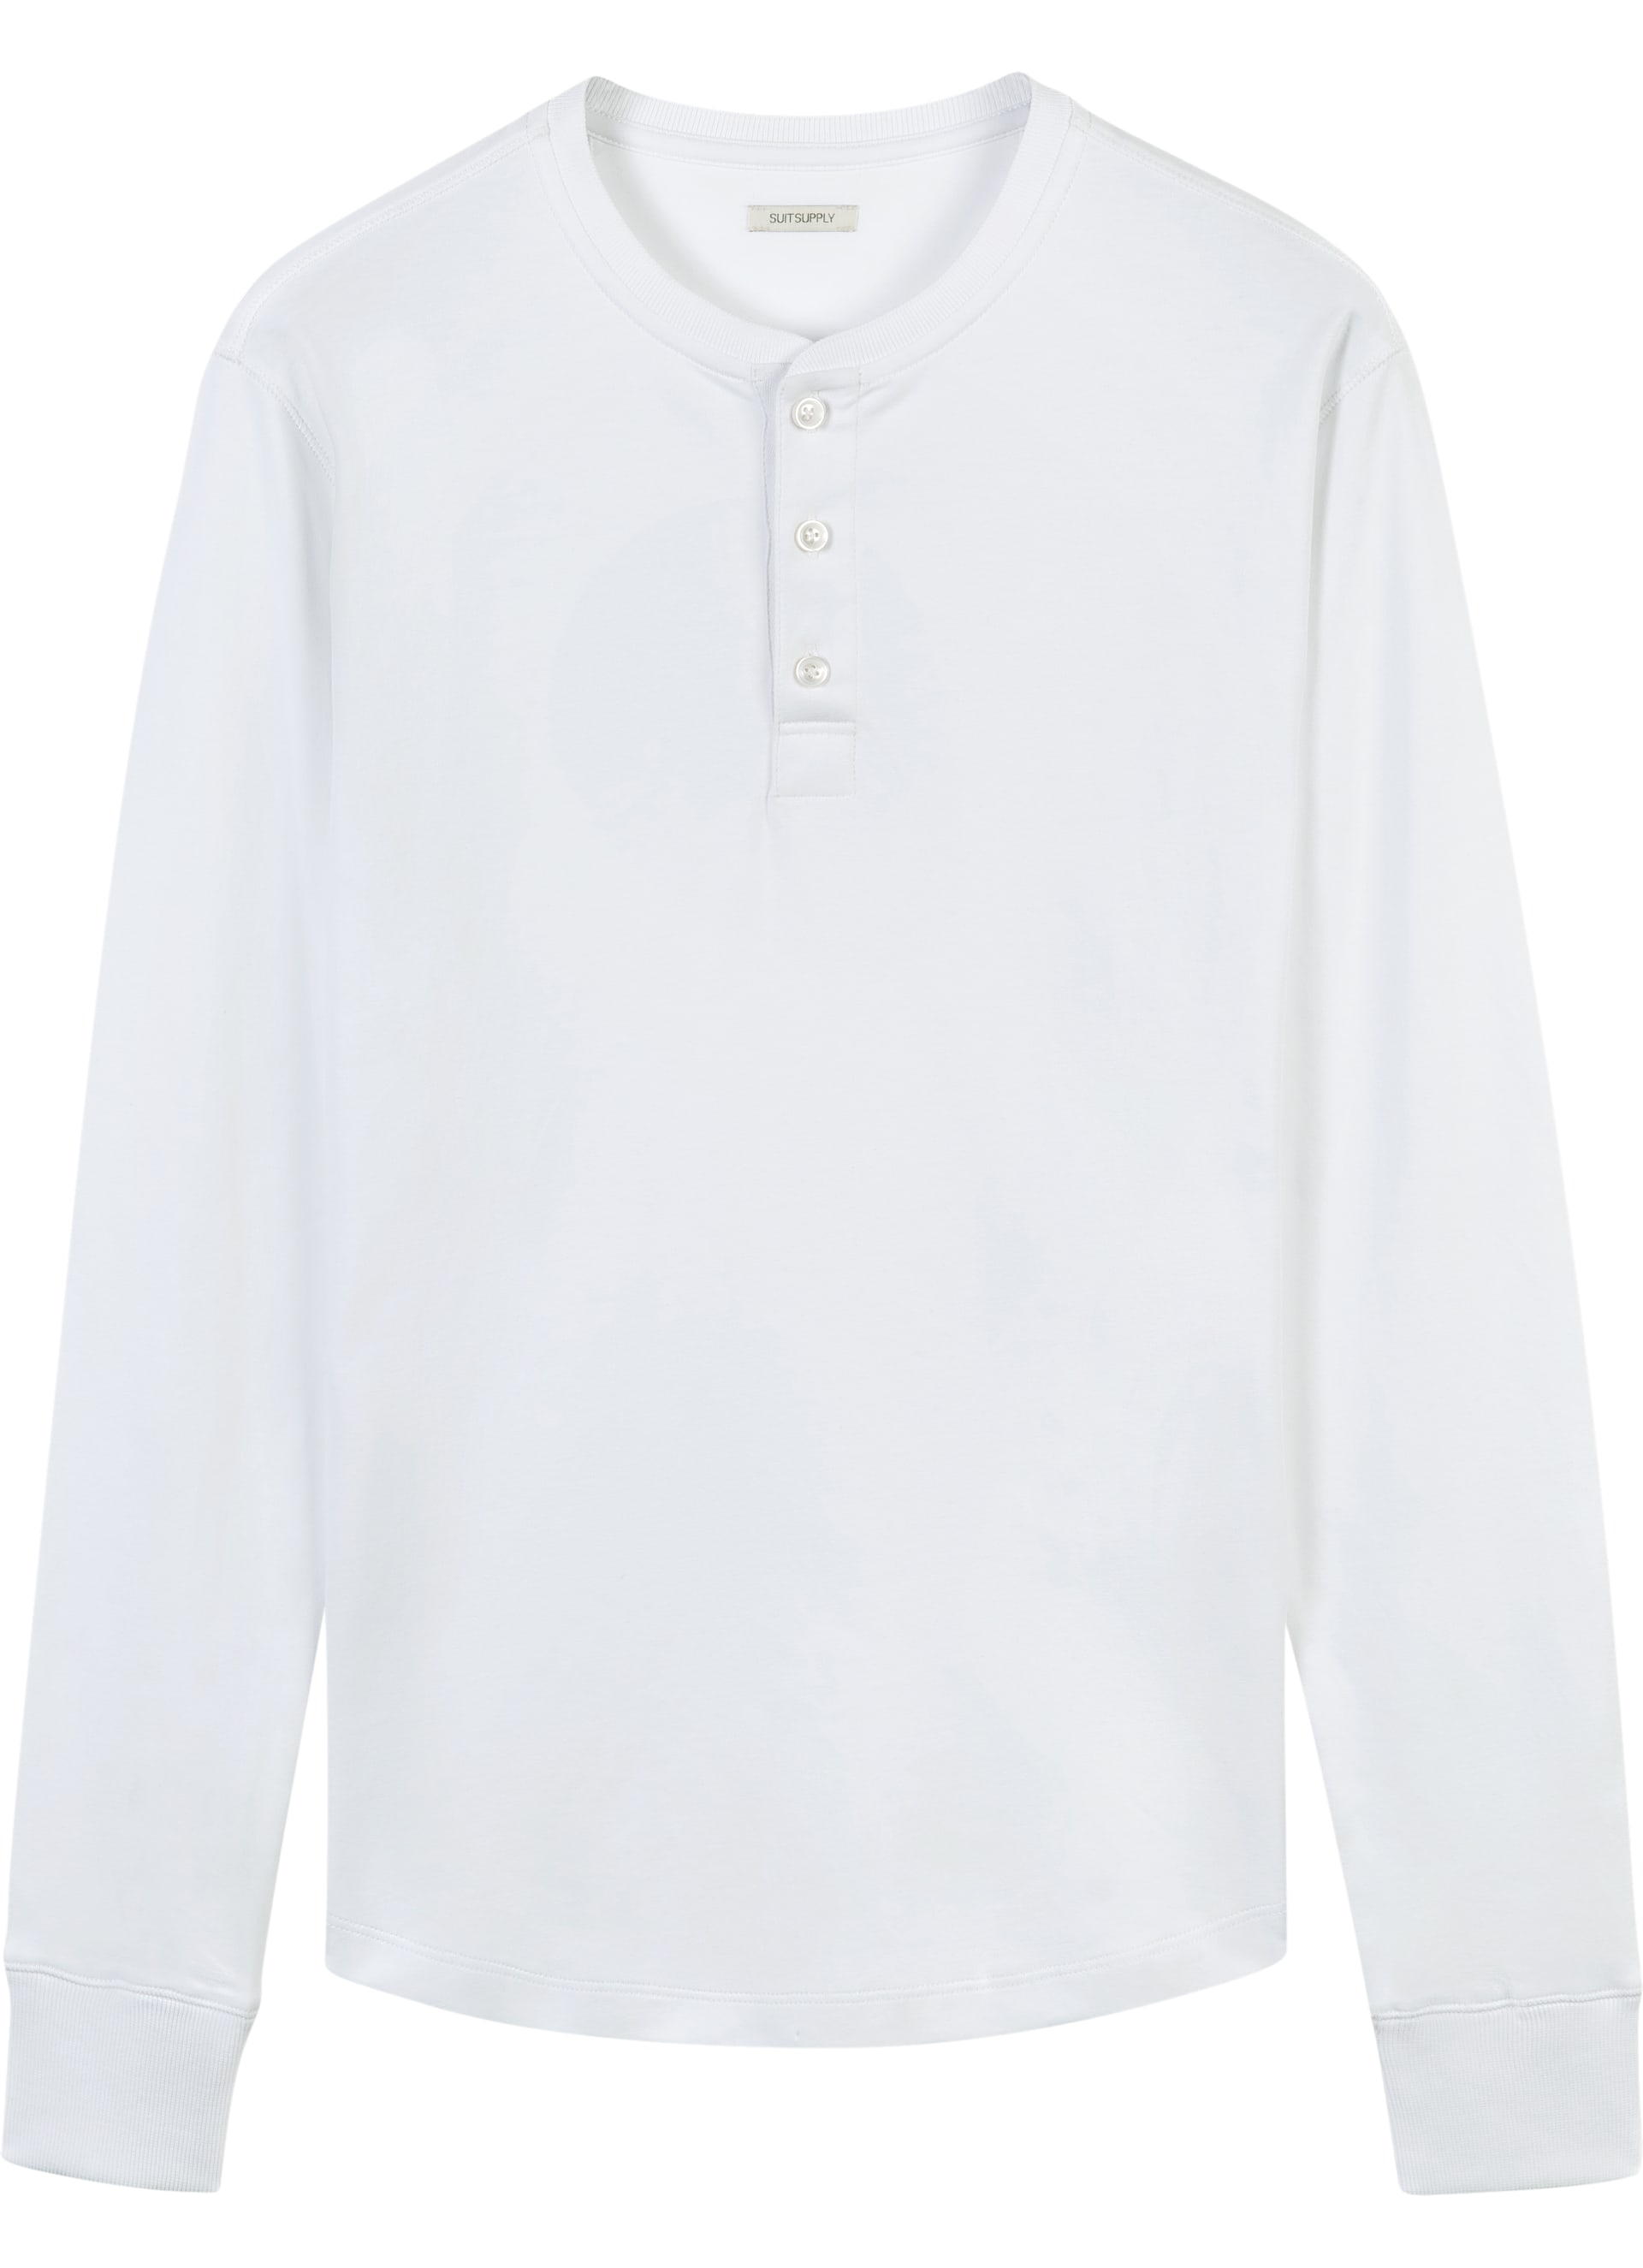 White Henley T-shirt Sw772 | Suitsupply Online Store